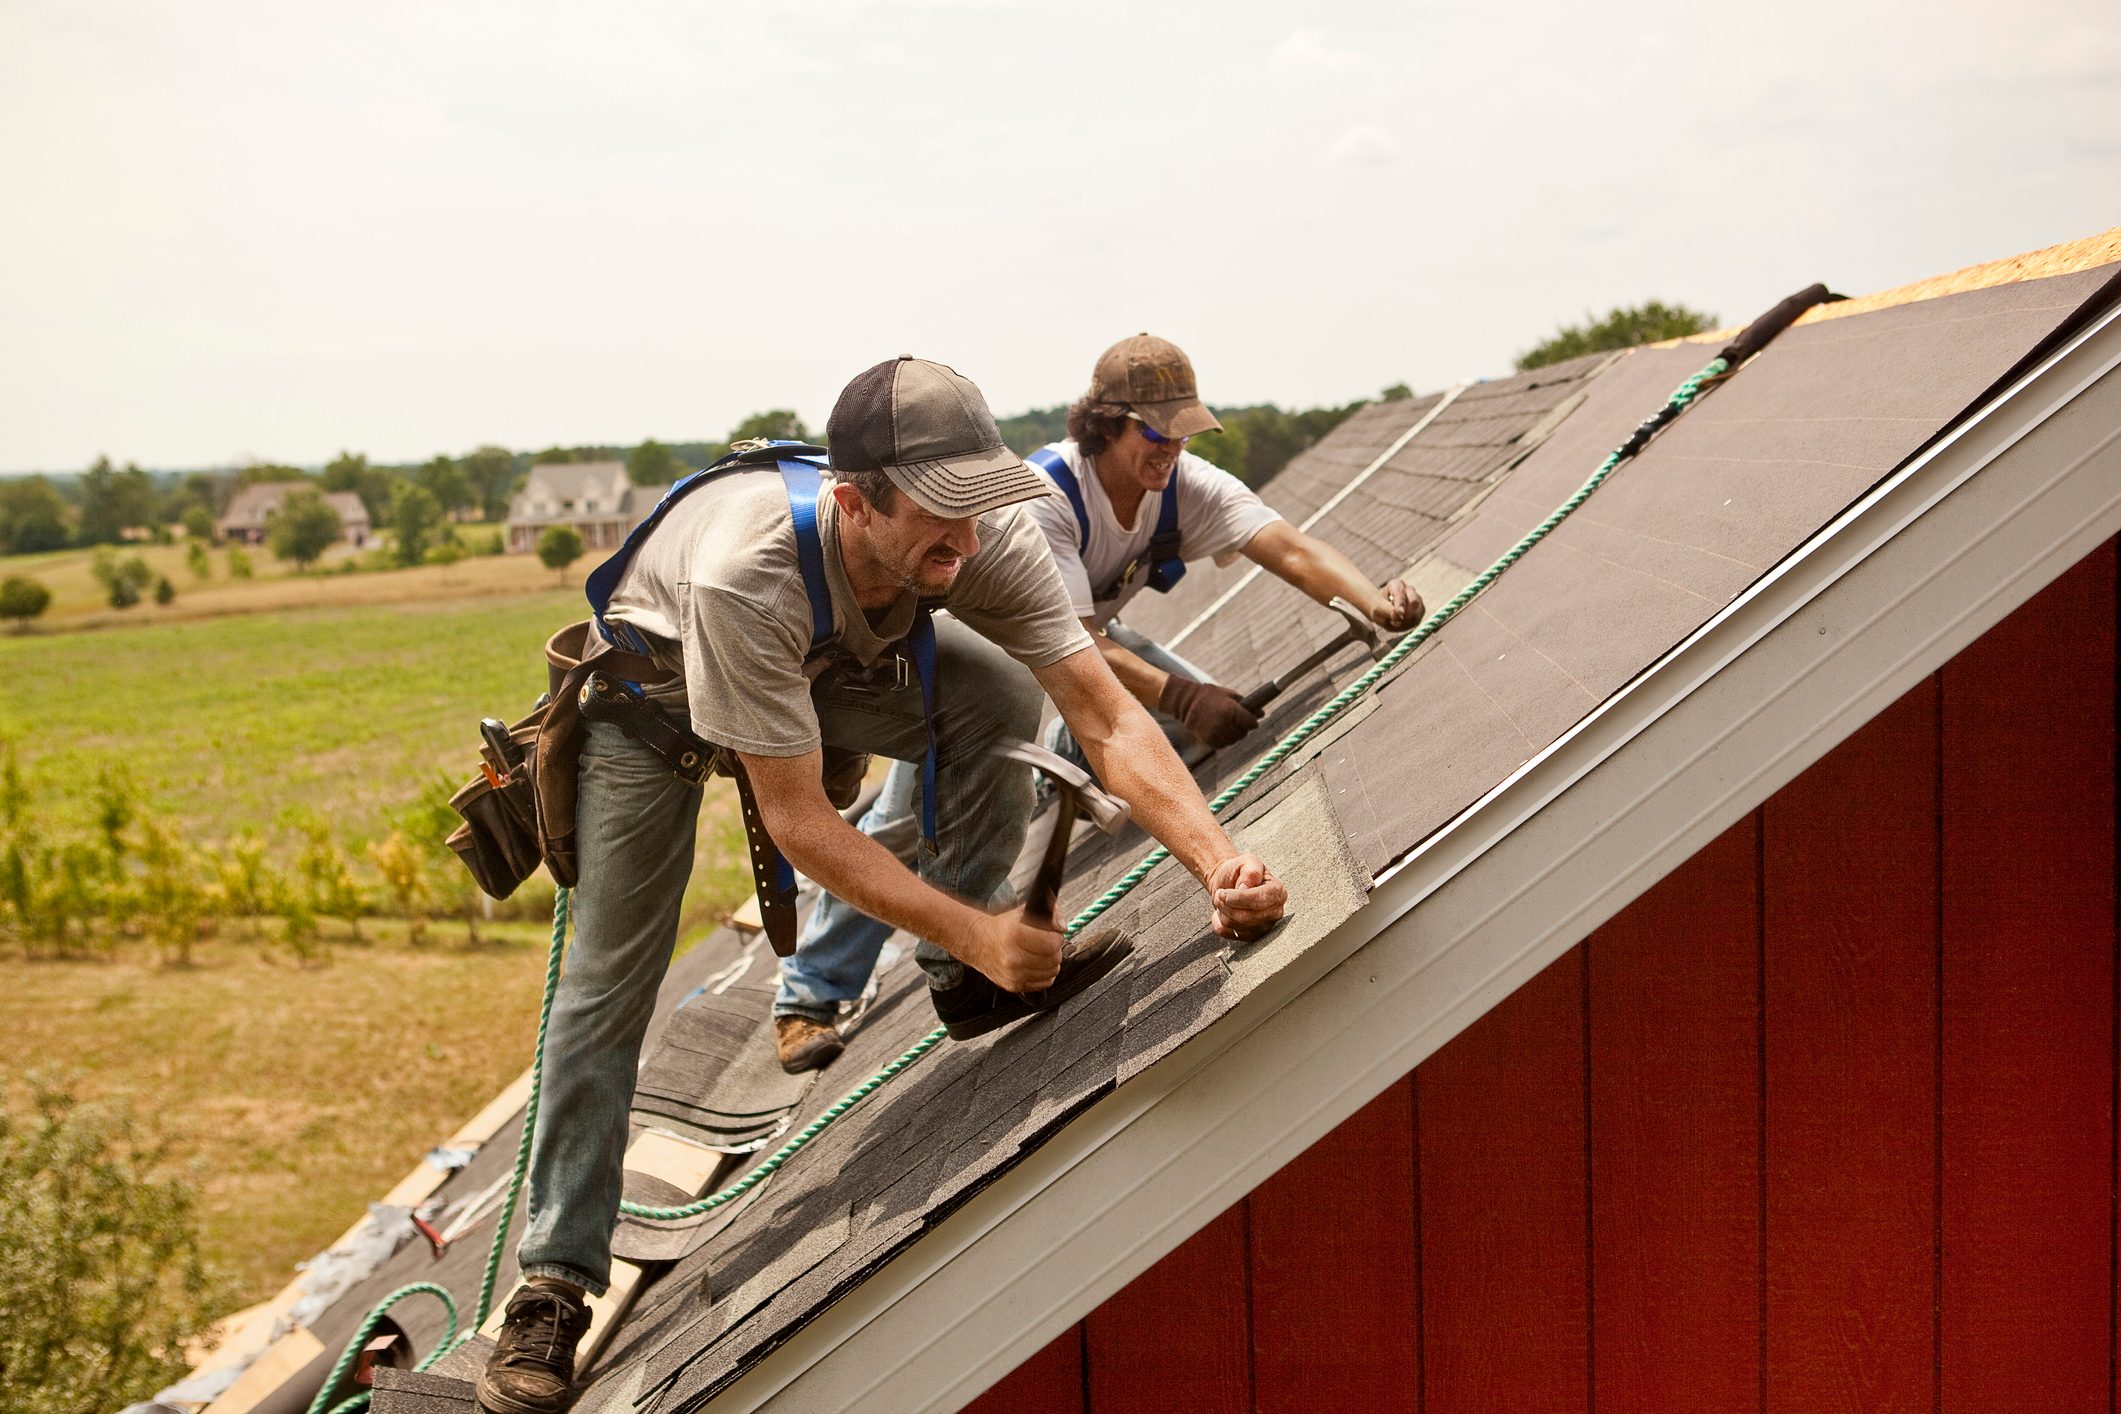 Two men working on repairing a home's roof.